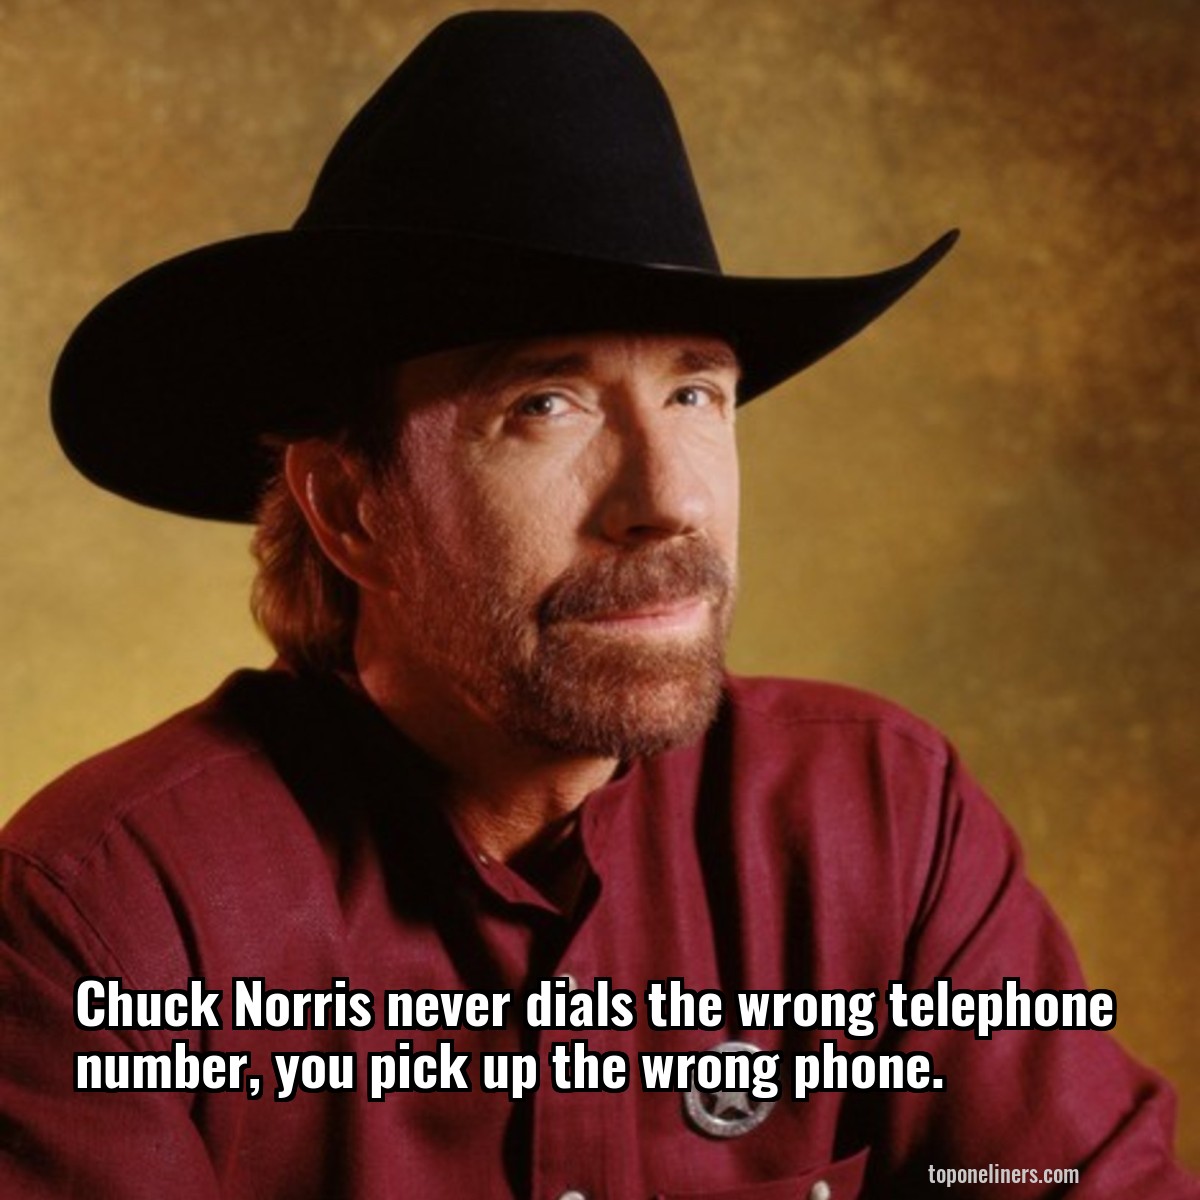 Chuck Norris never dials the wrong telephone number, you pick up the wrong phone.